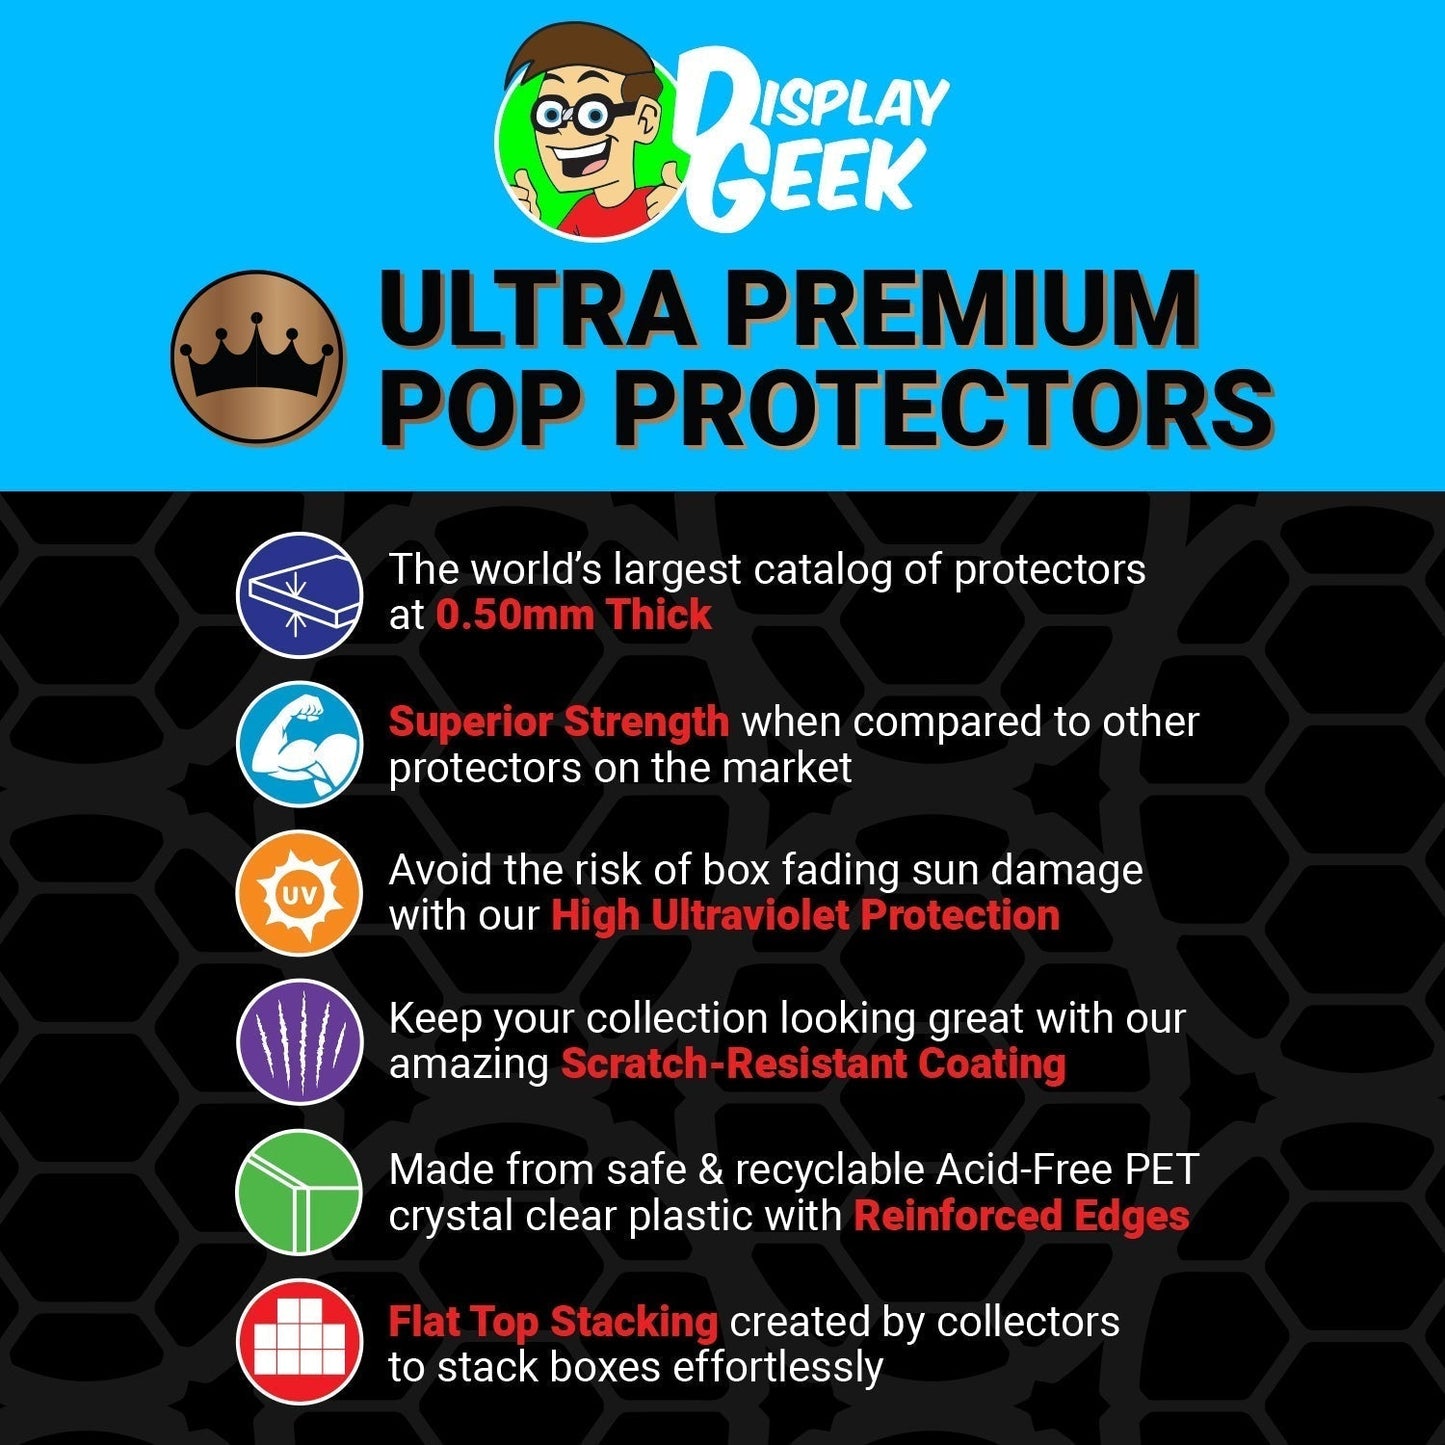 Pop Protector for Pop & Tee Joker with Megaphone 1989 Metallic #403 Funko Box - PPG Pop Protector Guide Search Created by Display Geek